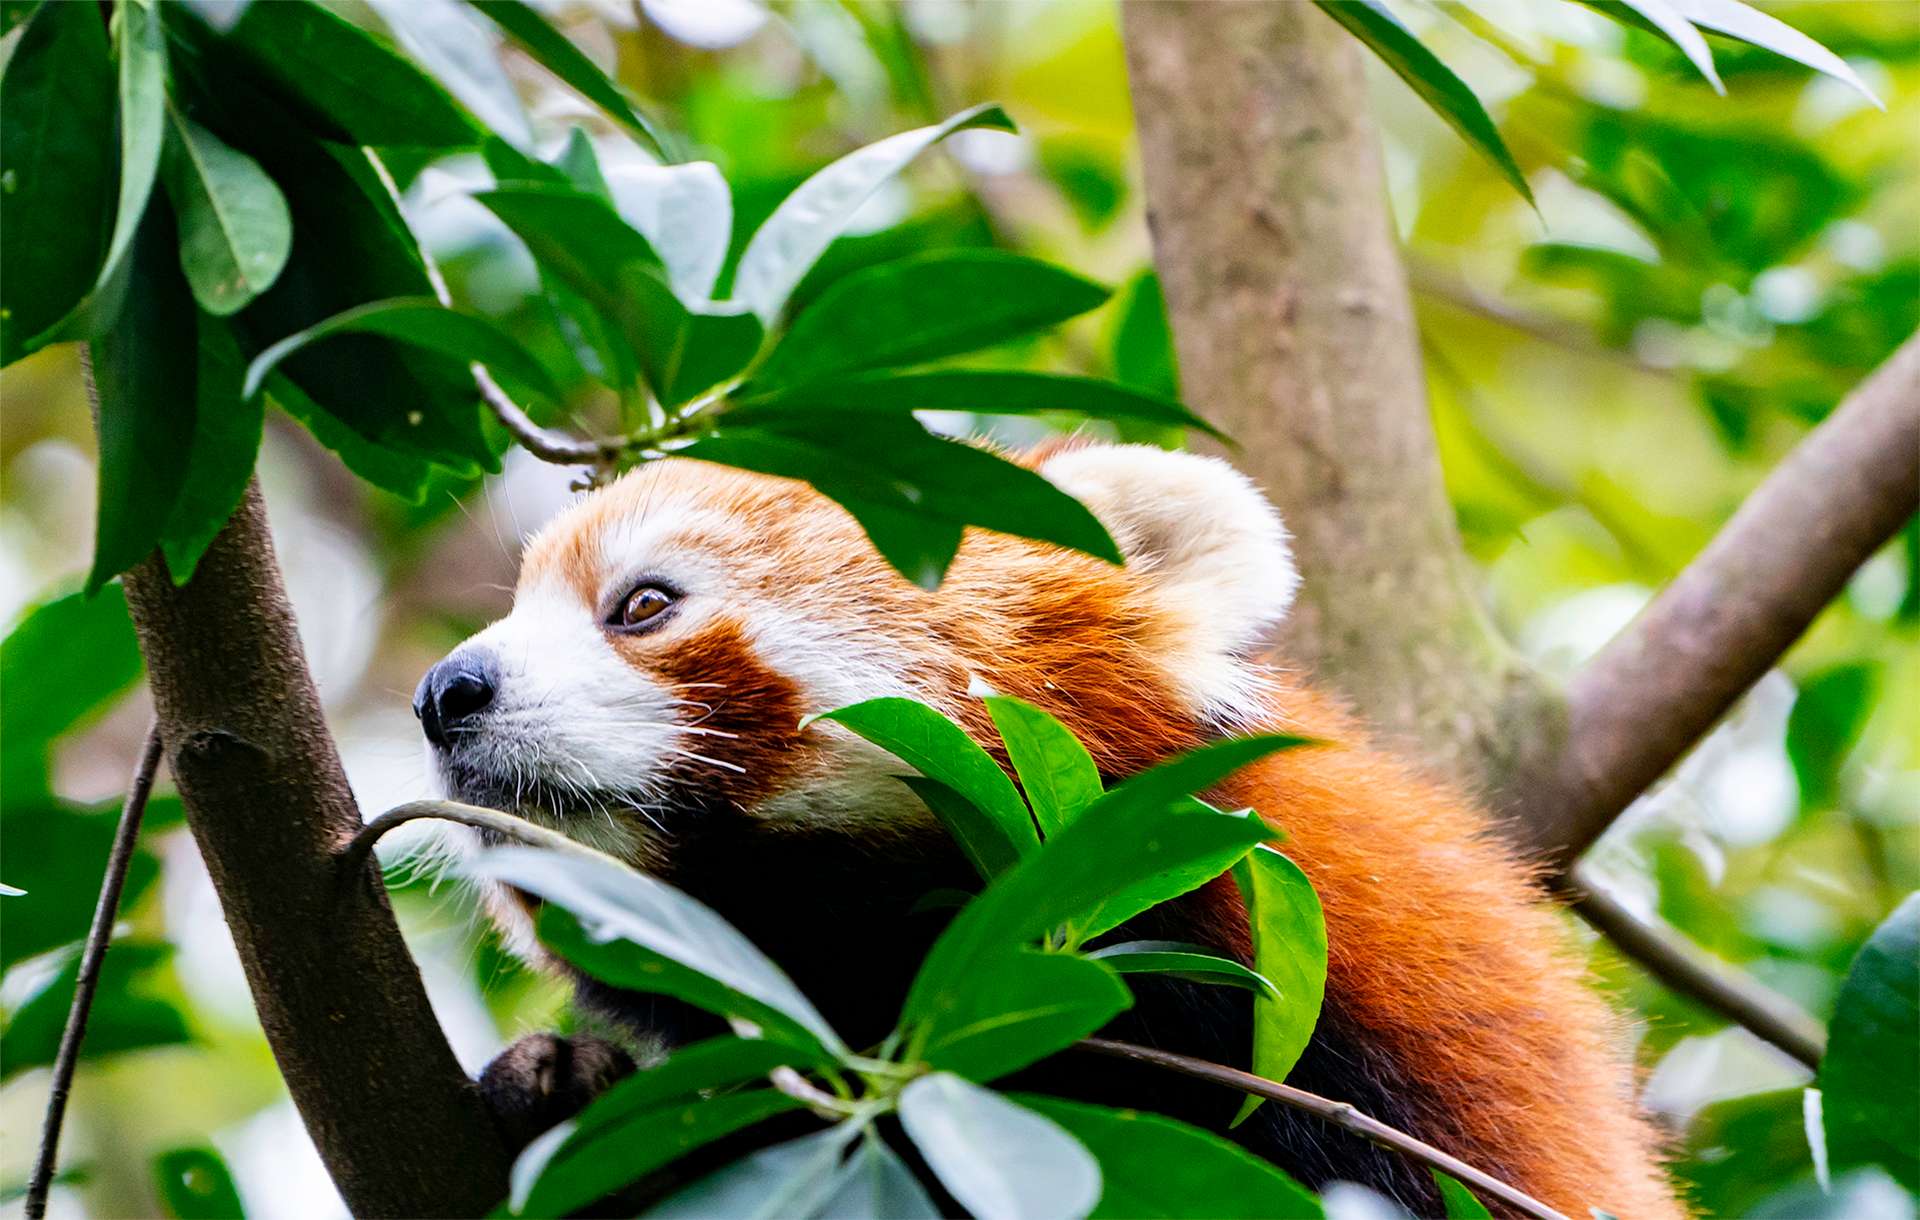 Cute red panda high in a tree branch tree canopy in the forest of China